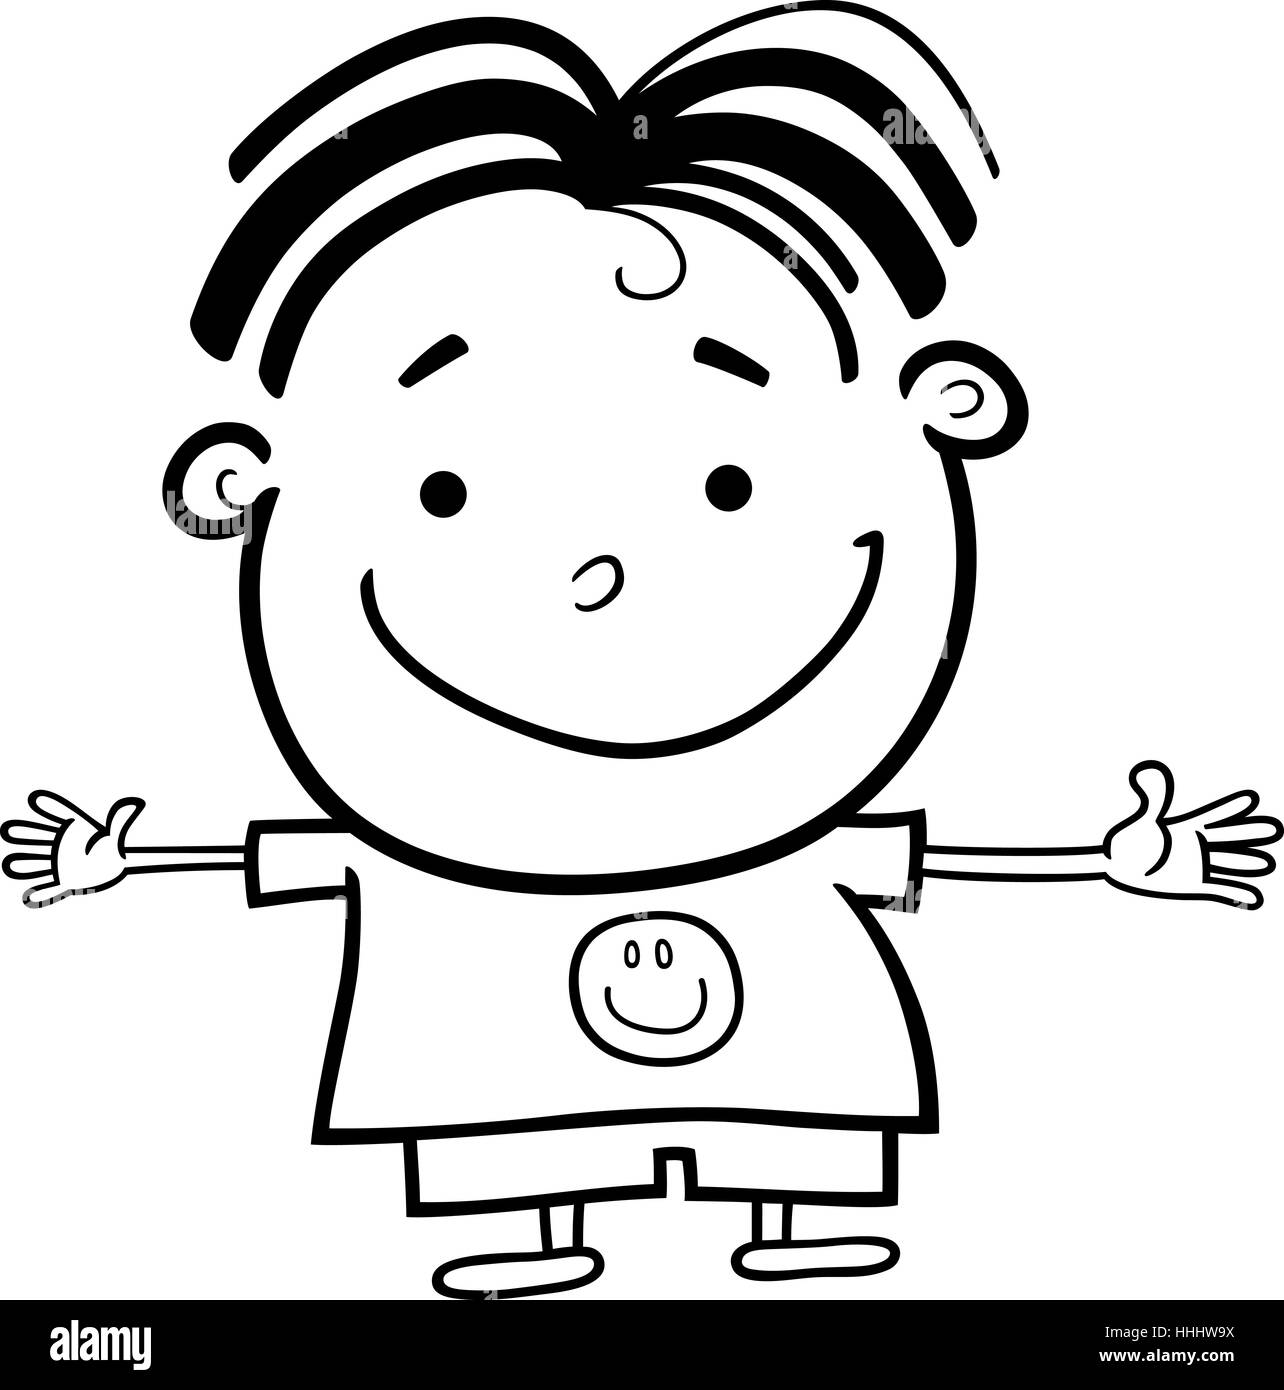 Cartoon Illustration of Cute Little Happy Boy for Coloring Book or Page Stock Photo